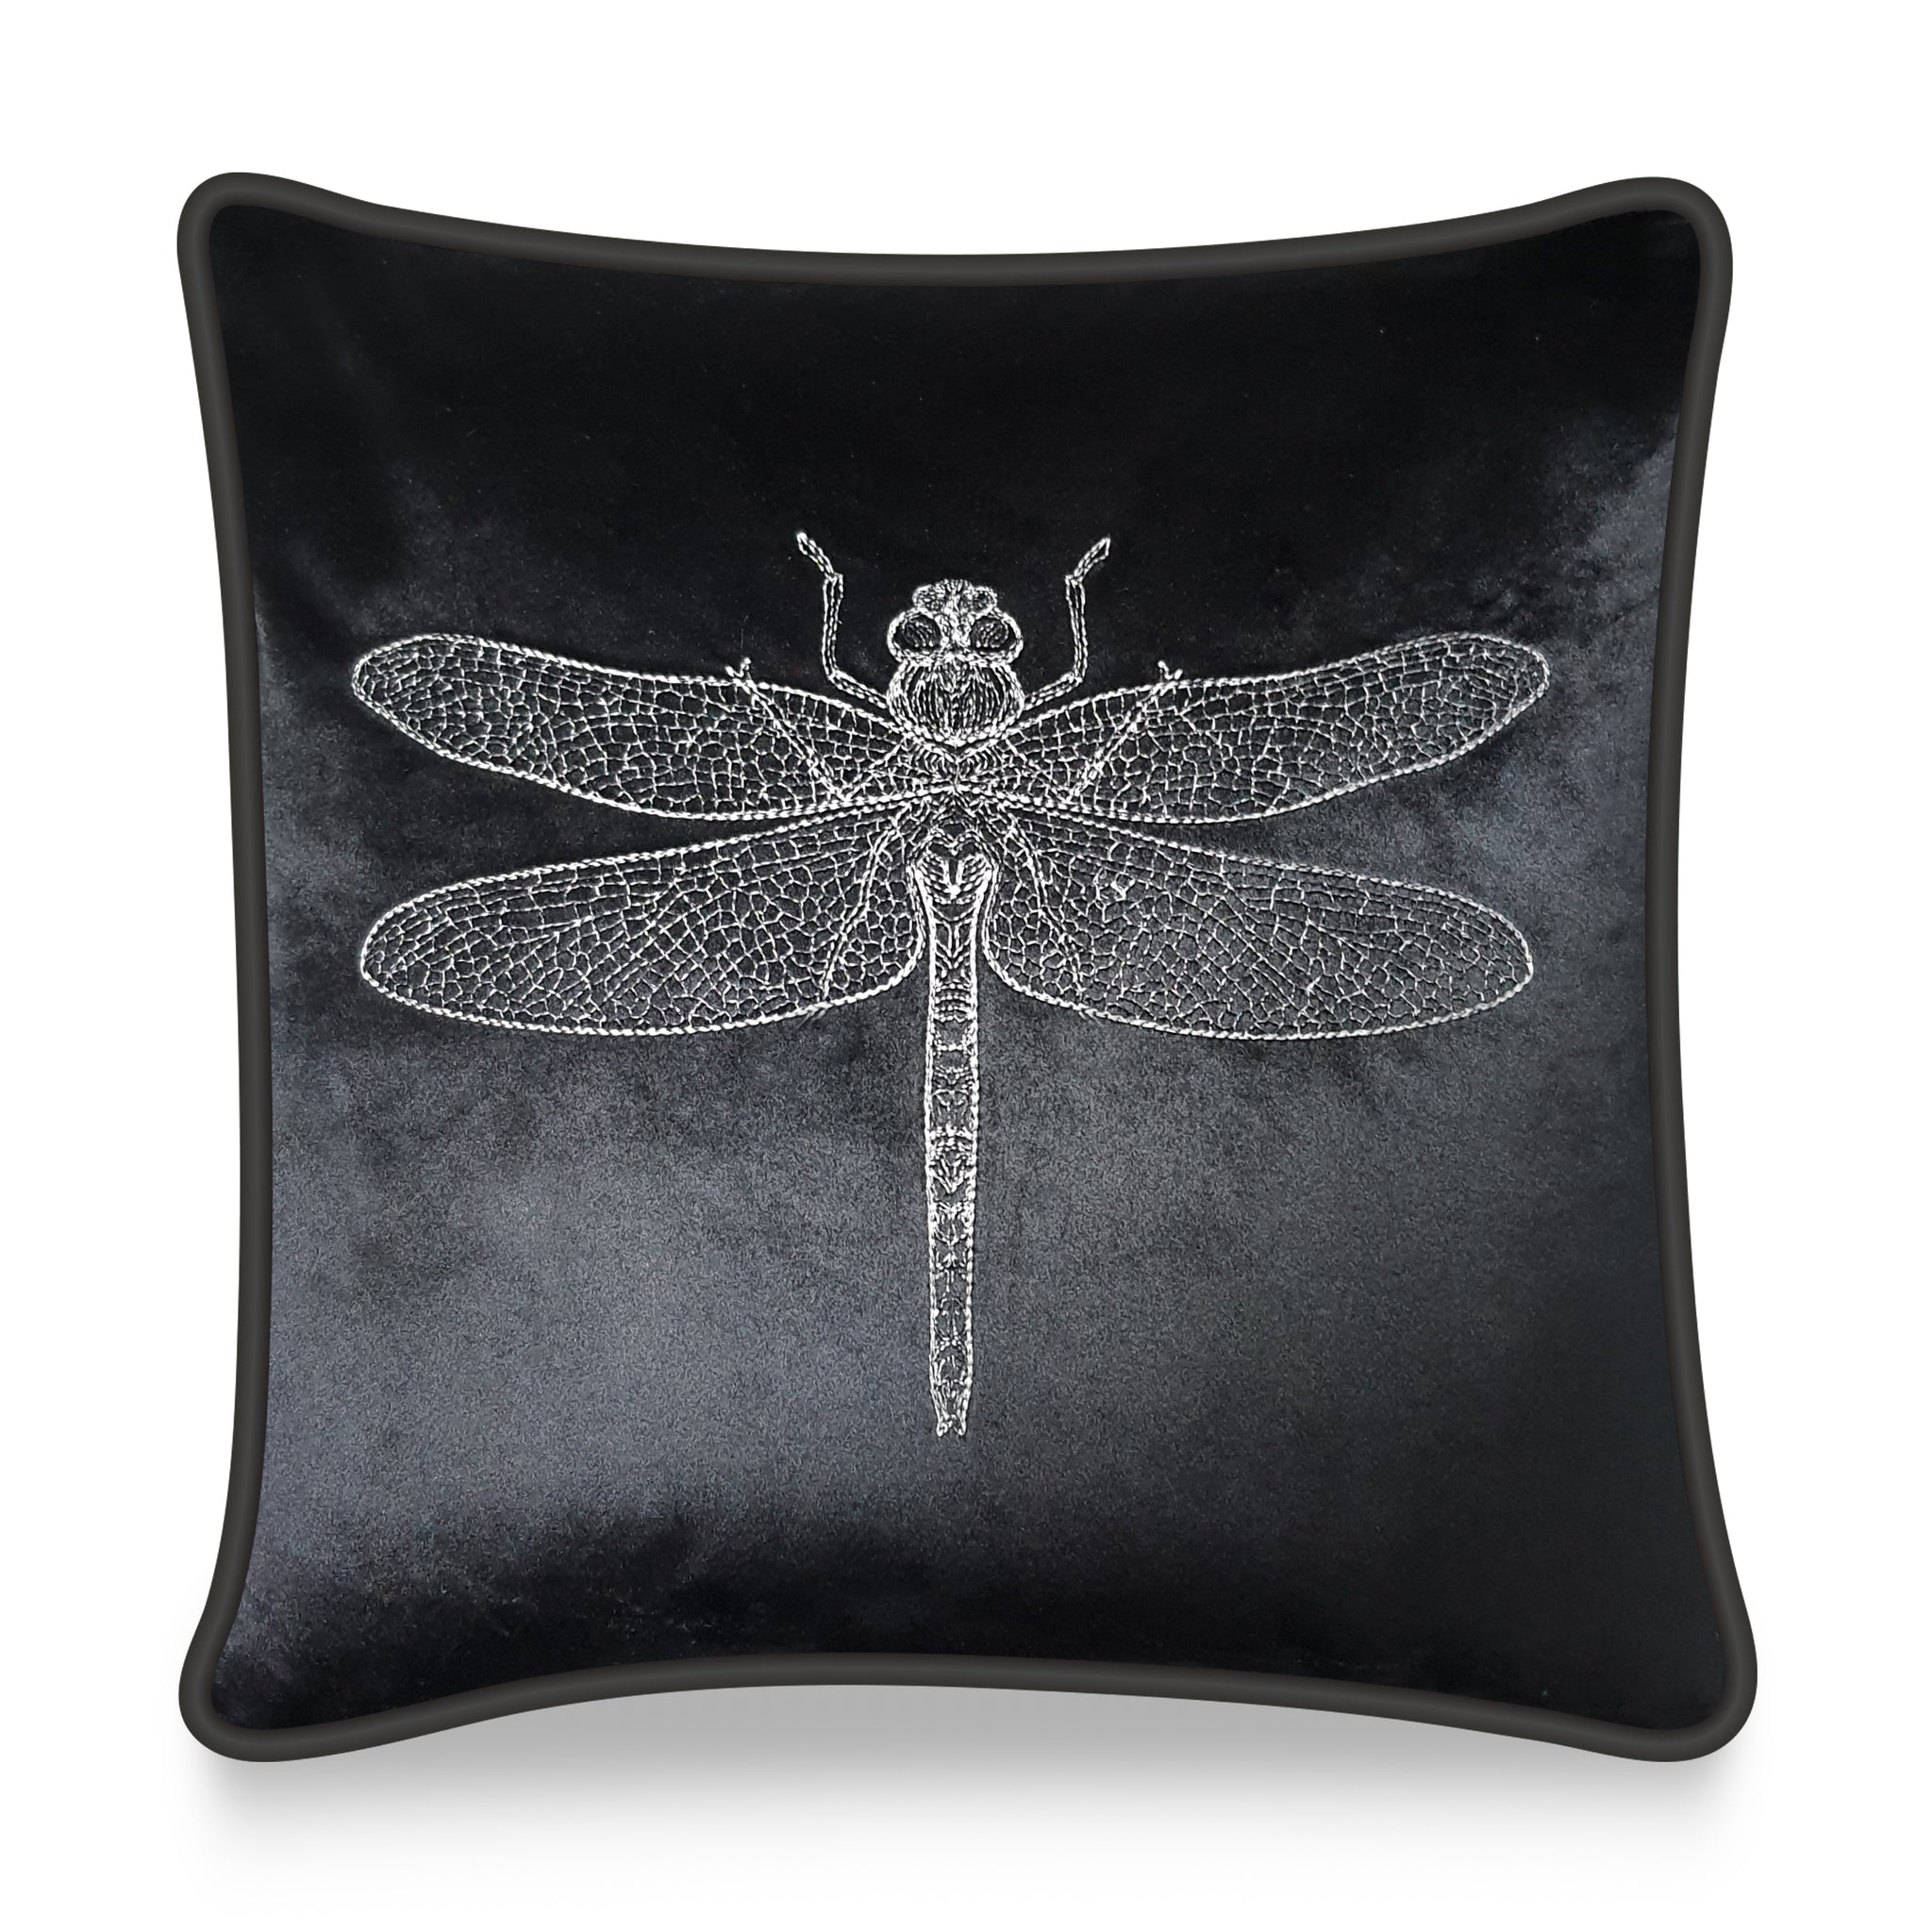  Velvet Cushion Cover Sketched Dragonfly Embroidery Decorative Pillowcase Modern Home Decor Throw Pillow for Sofa Chair 45x45 cm 